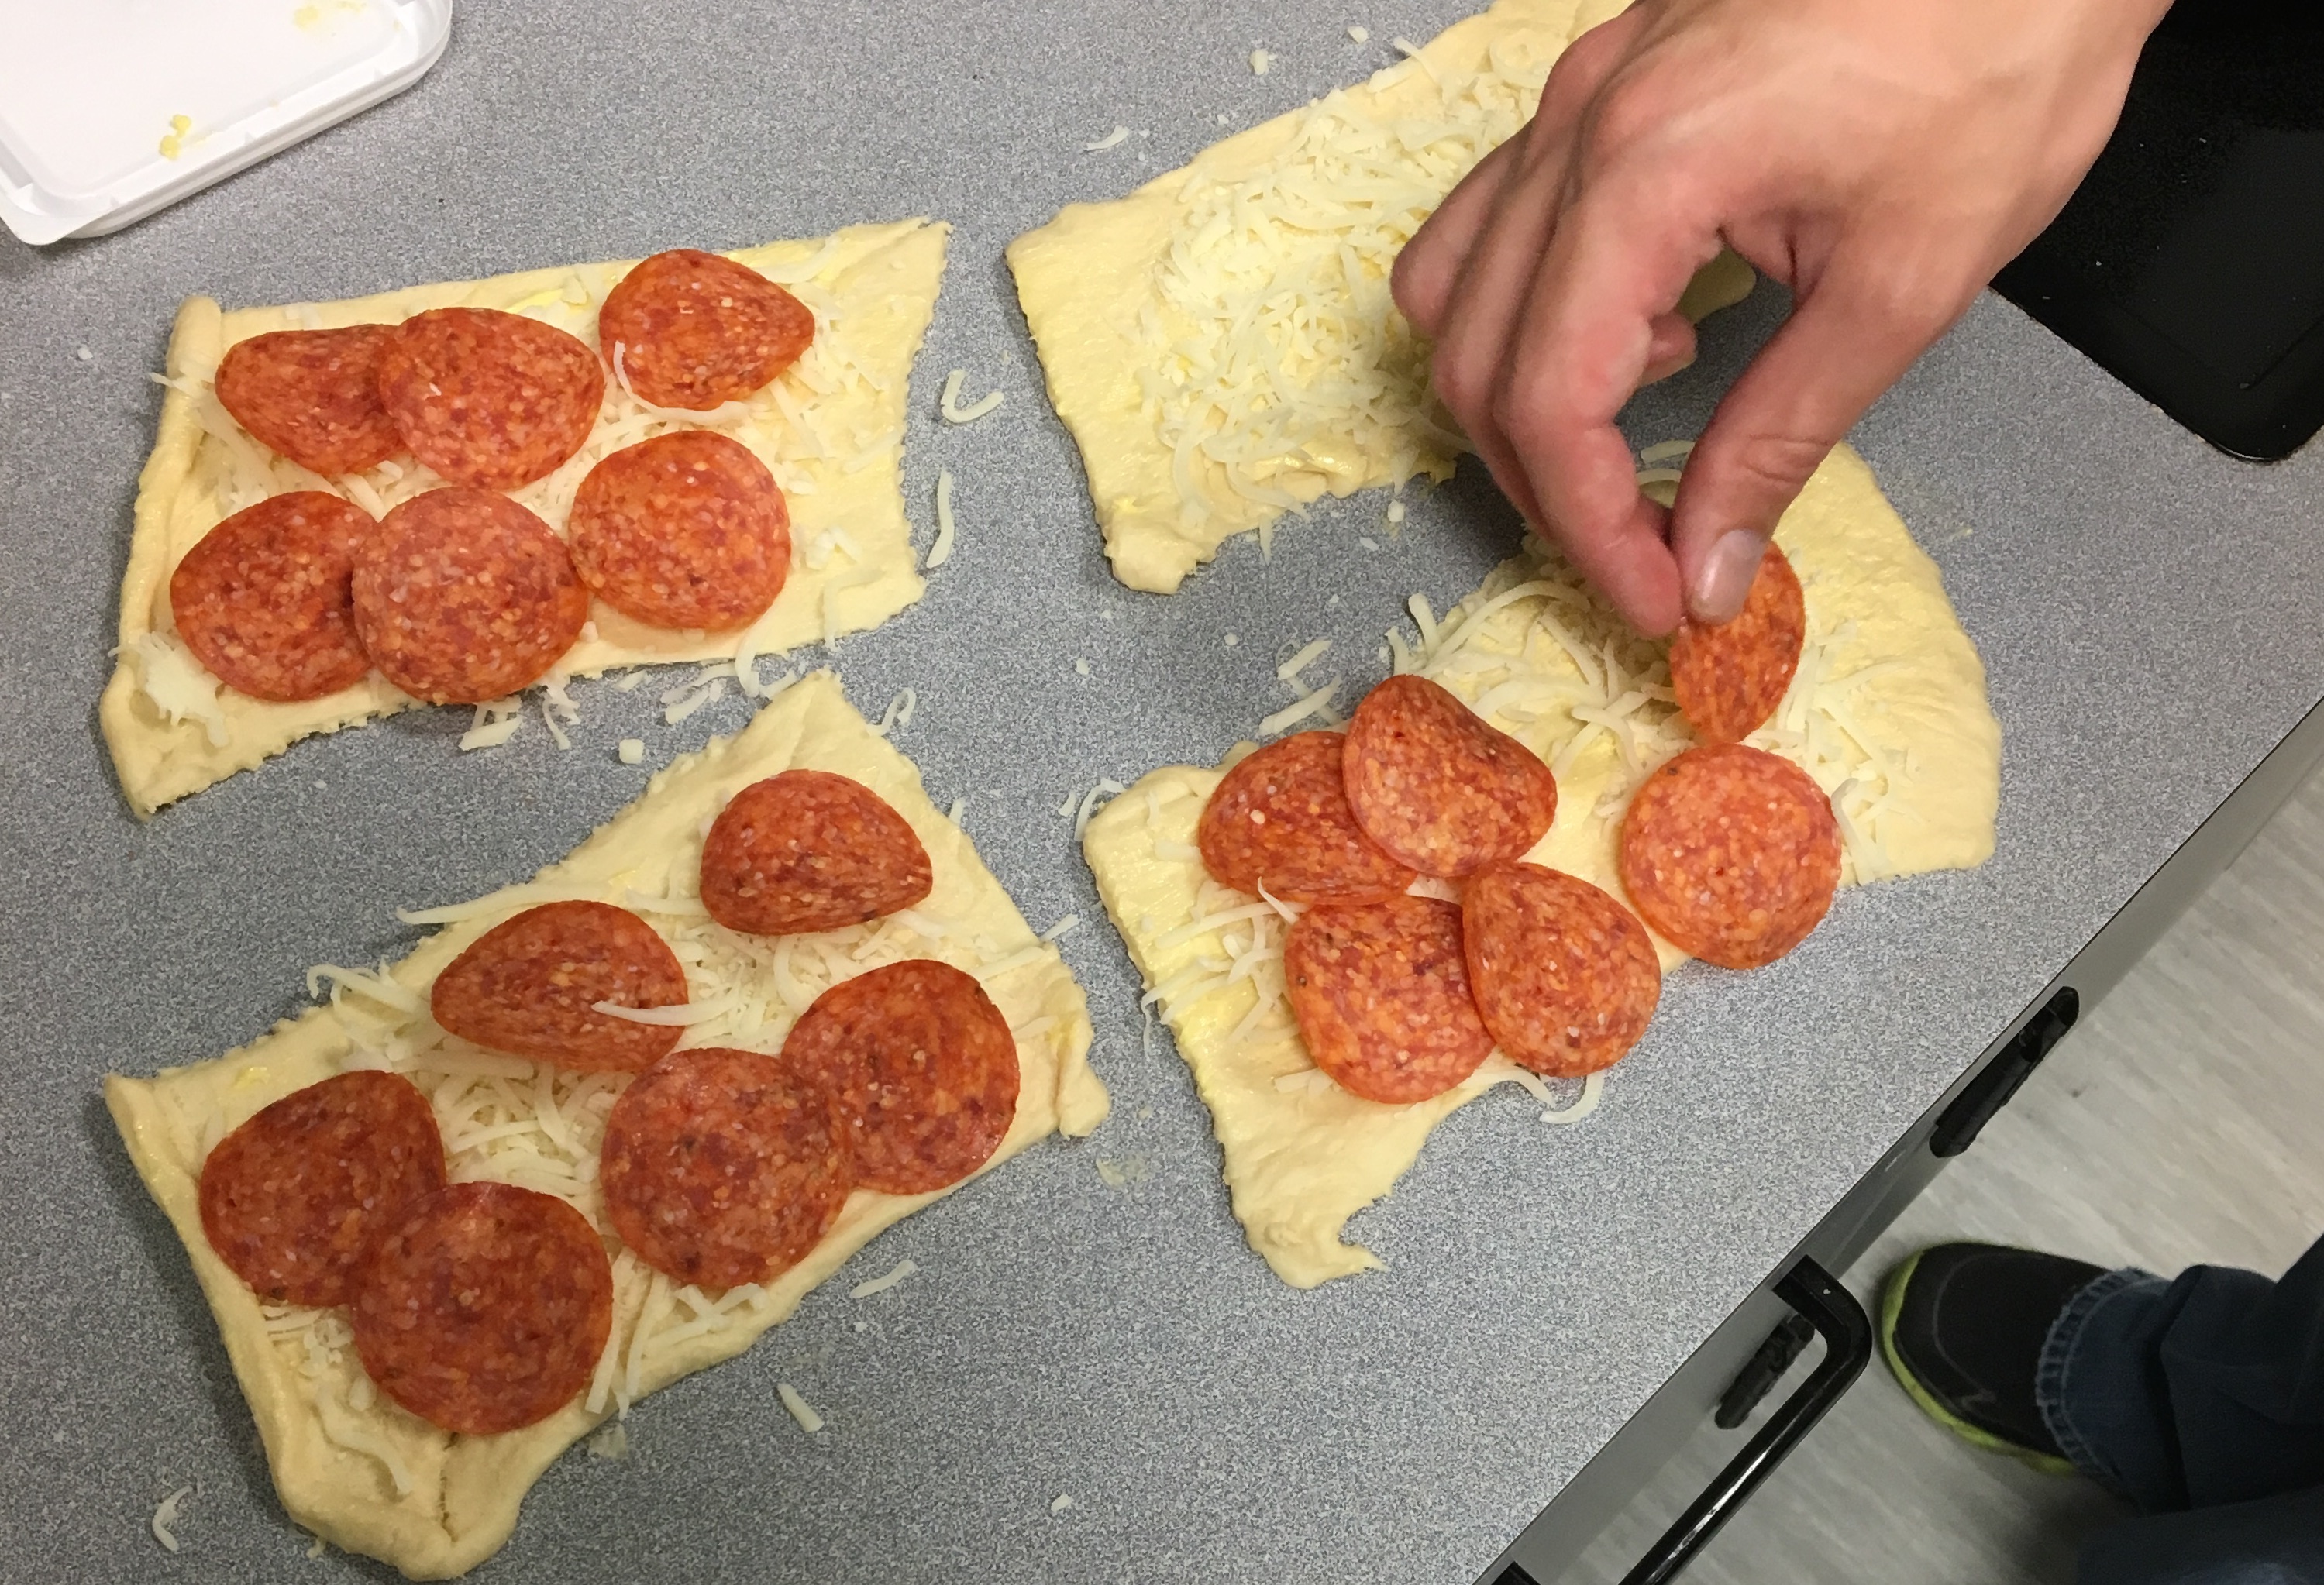 Braille cell pizza twists